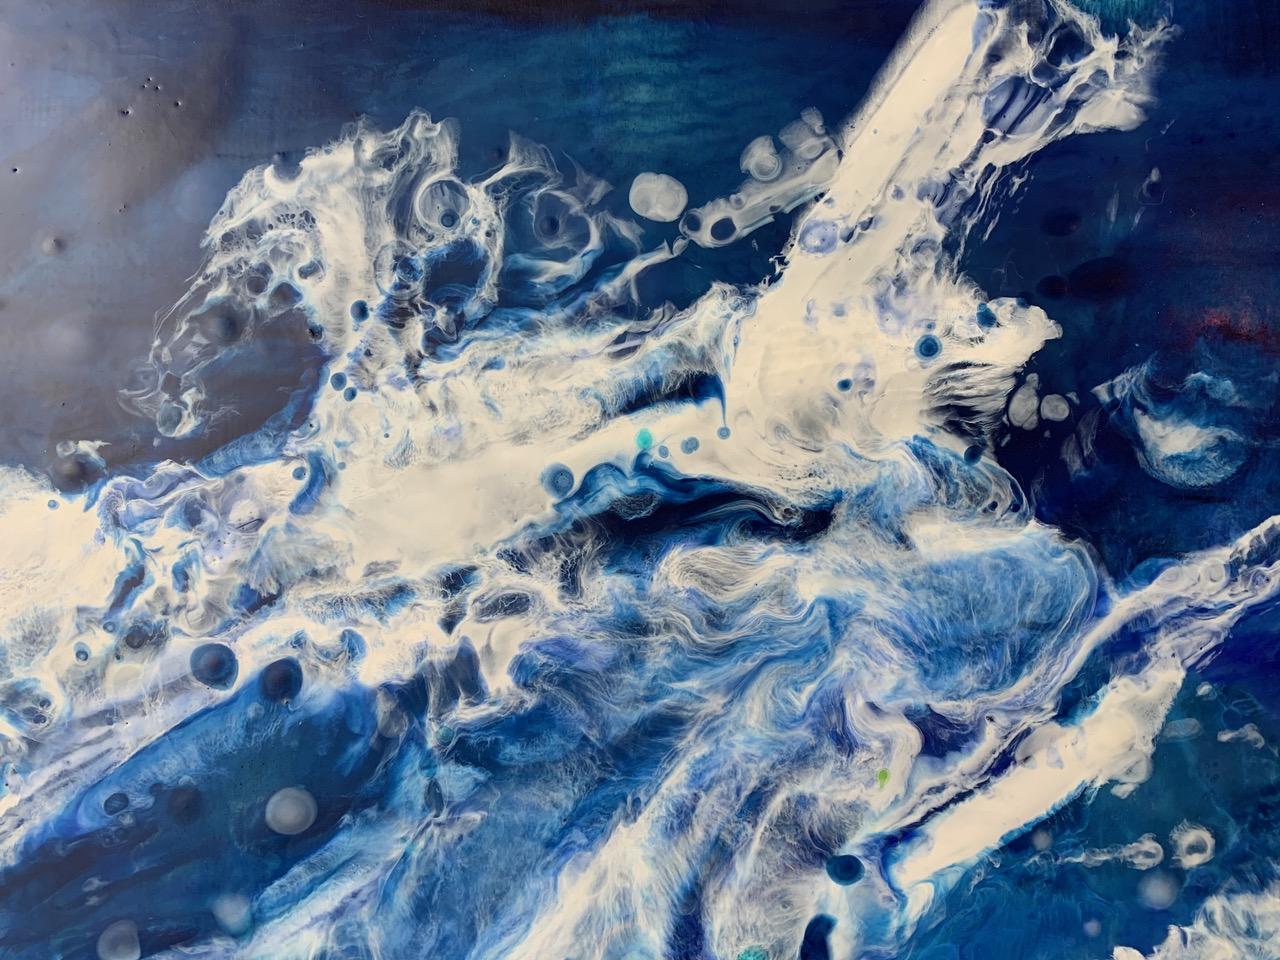 Cap Breton is a flowing water scene by Canadian artist, Marie Danielle Leblanc.  It is mixed media painting with encaustic and pigments .  She creates her art using her fingers to push and move the paint and pigments.  It is 30 inches by 60 inches